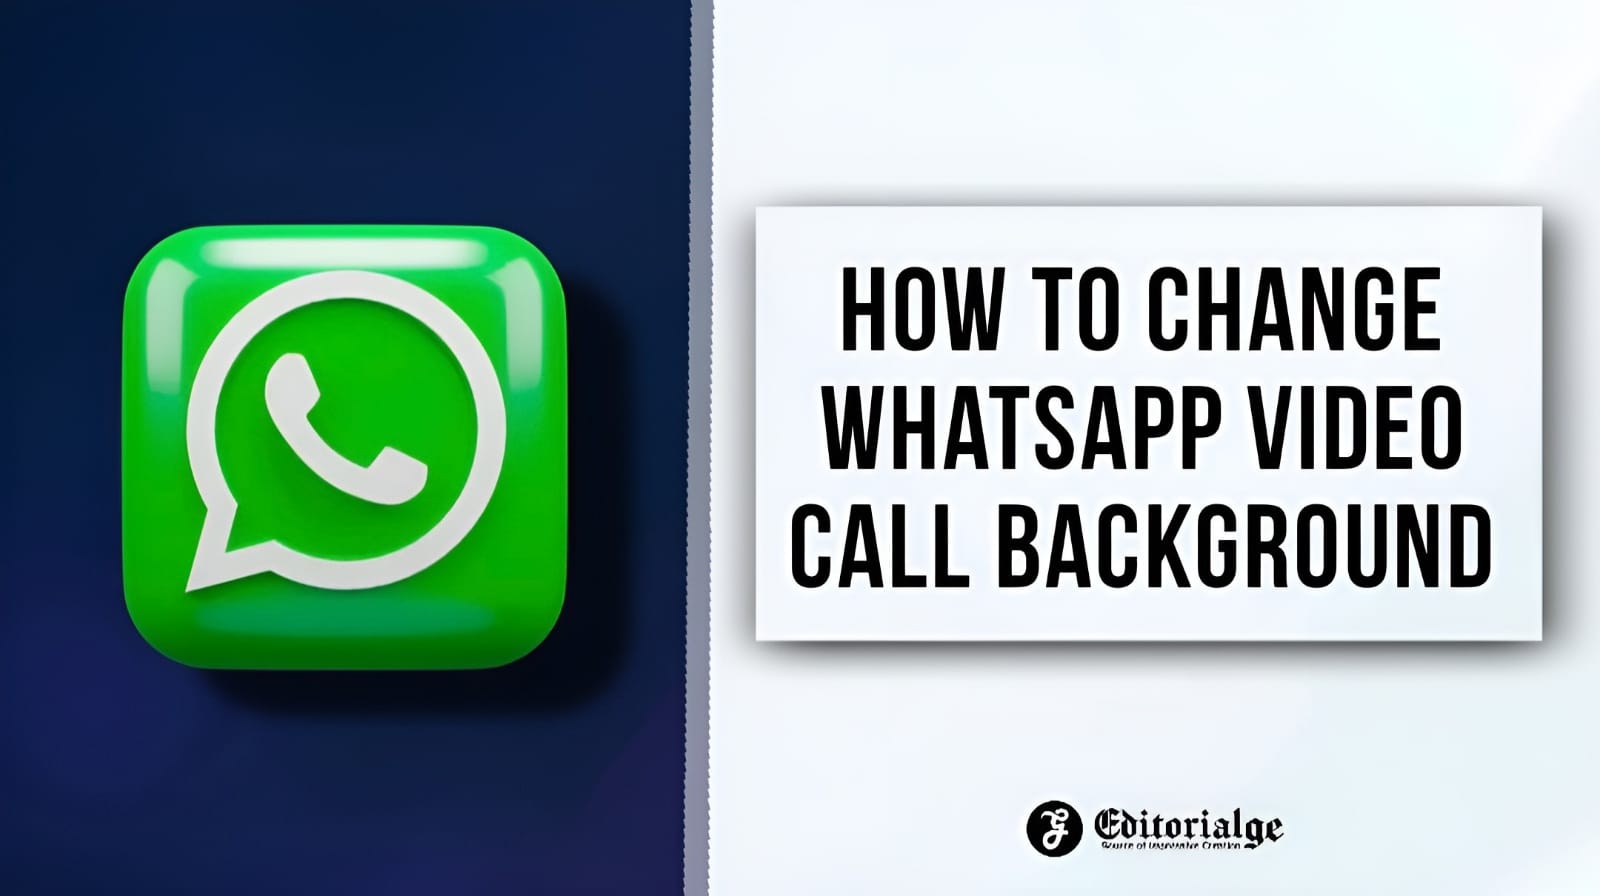 How to Change WhatsApp Video Call Background